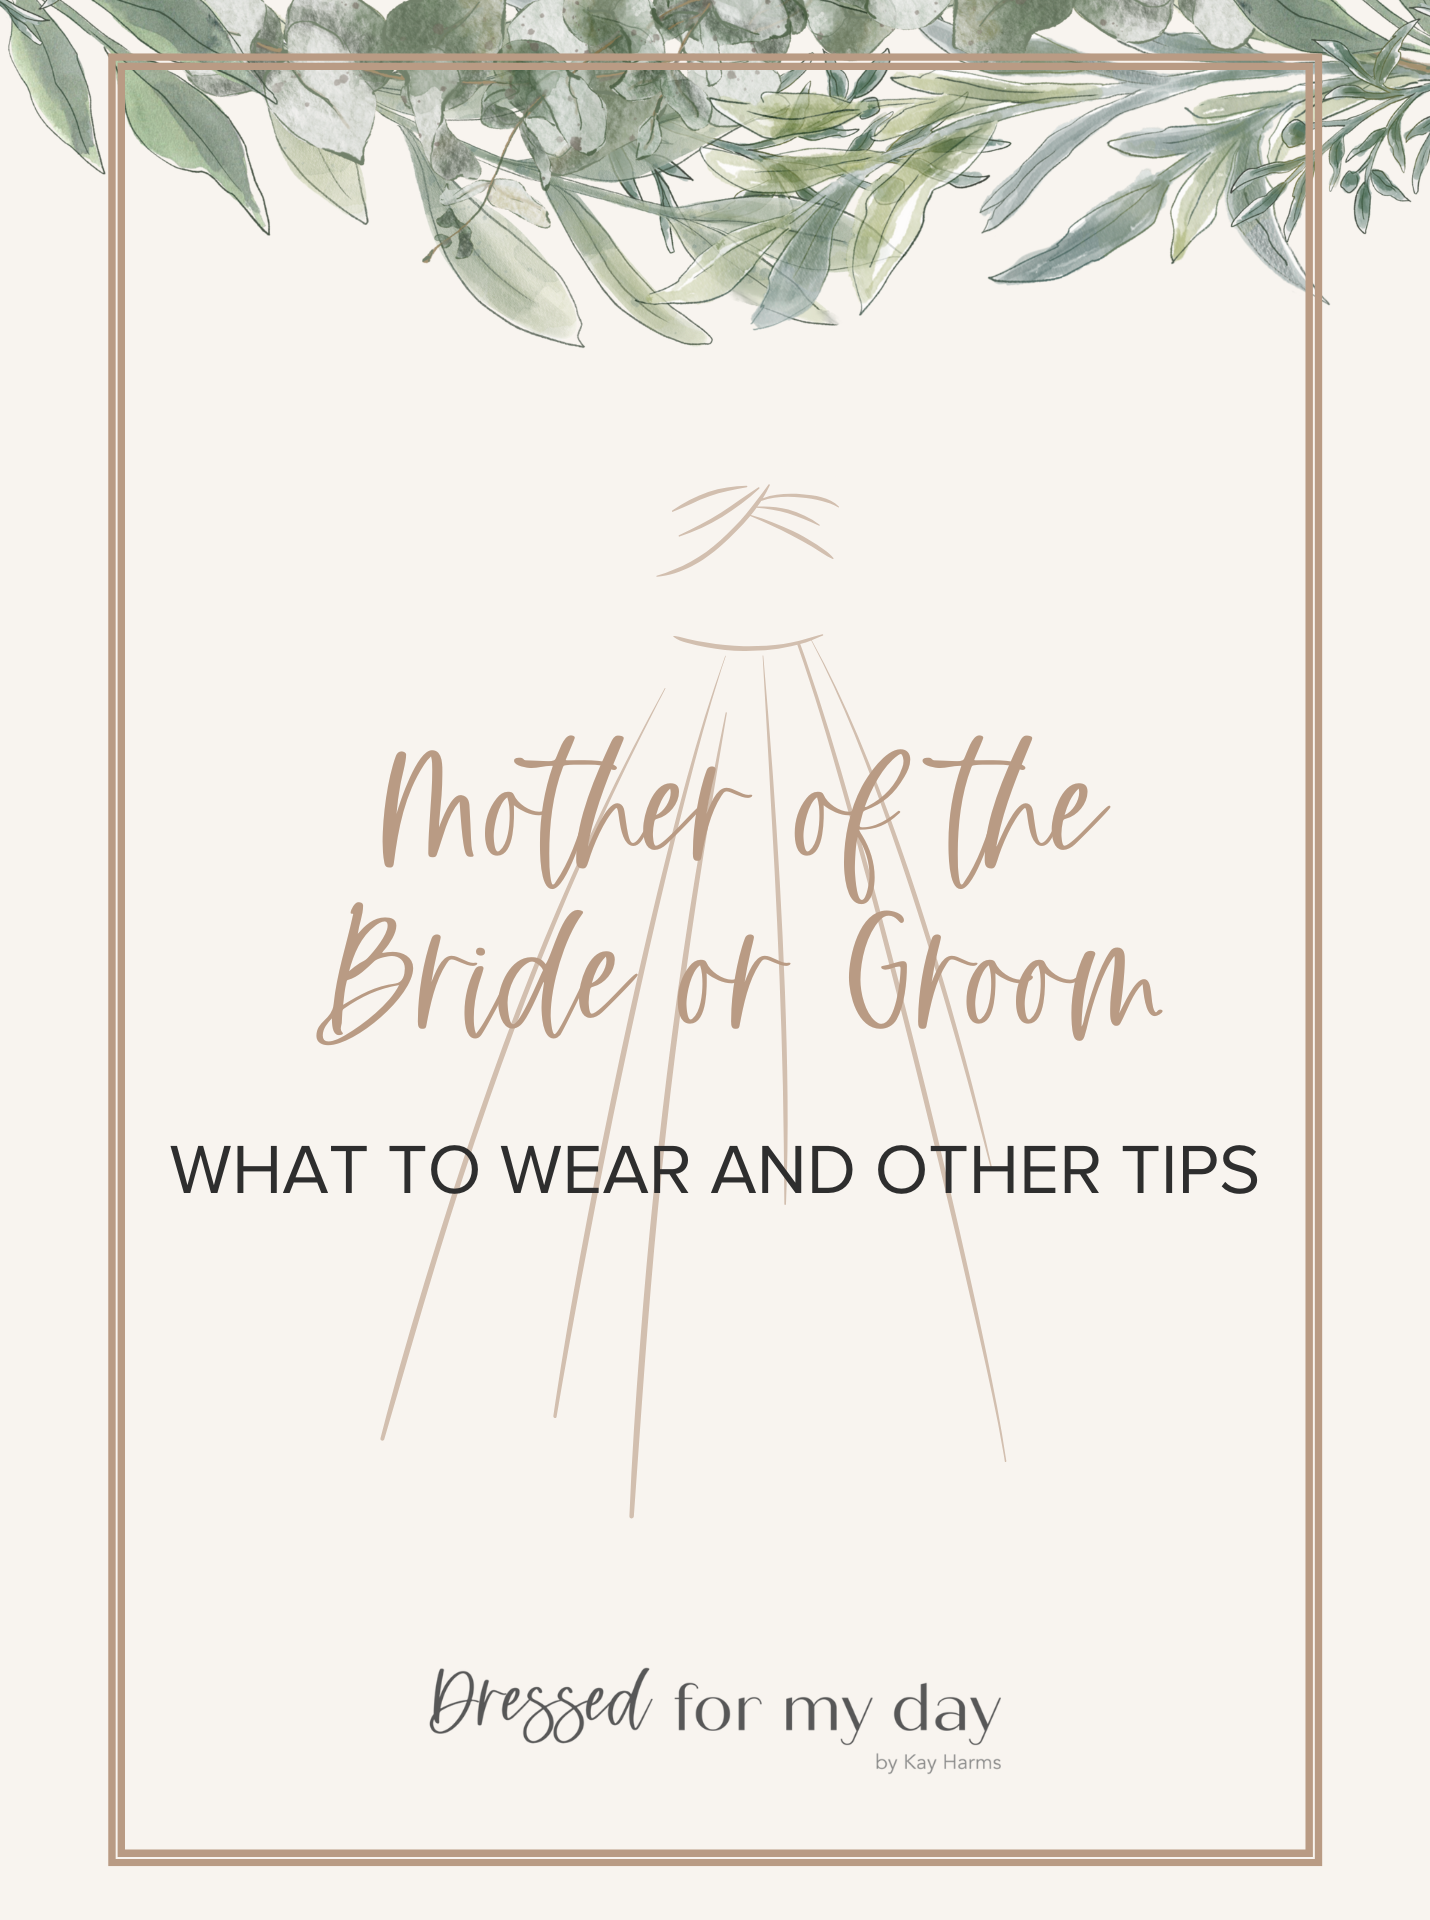 Mother of the Bride and Groom Dresses and Style Tips